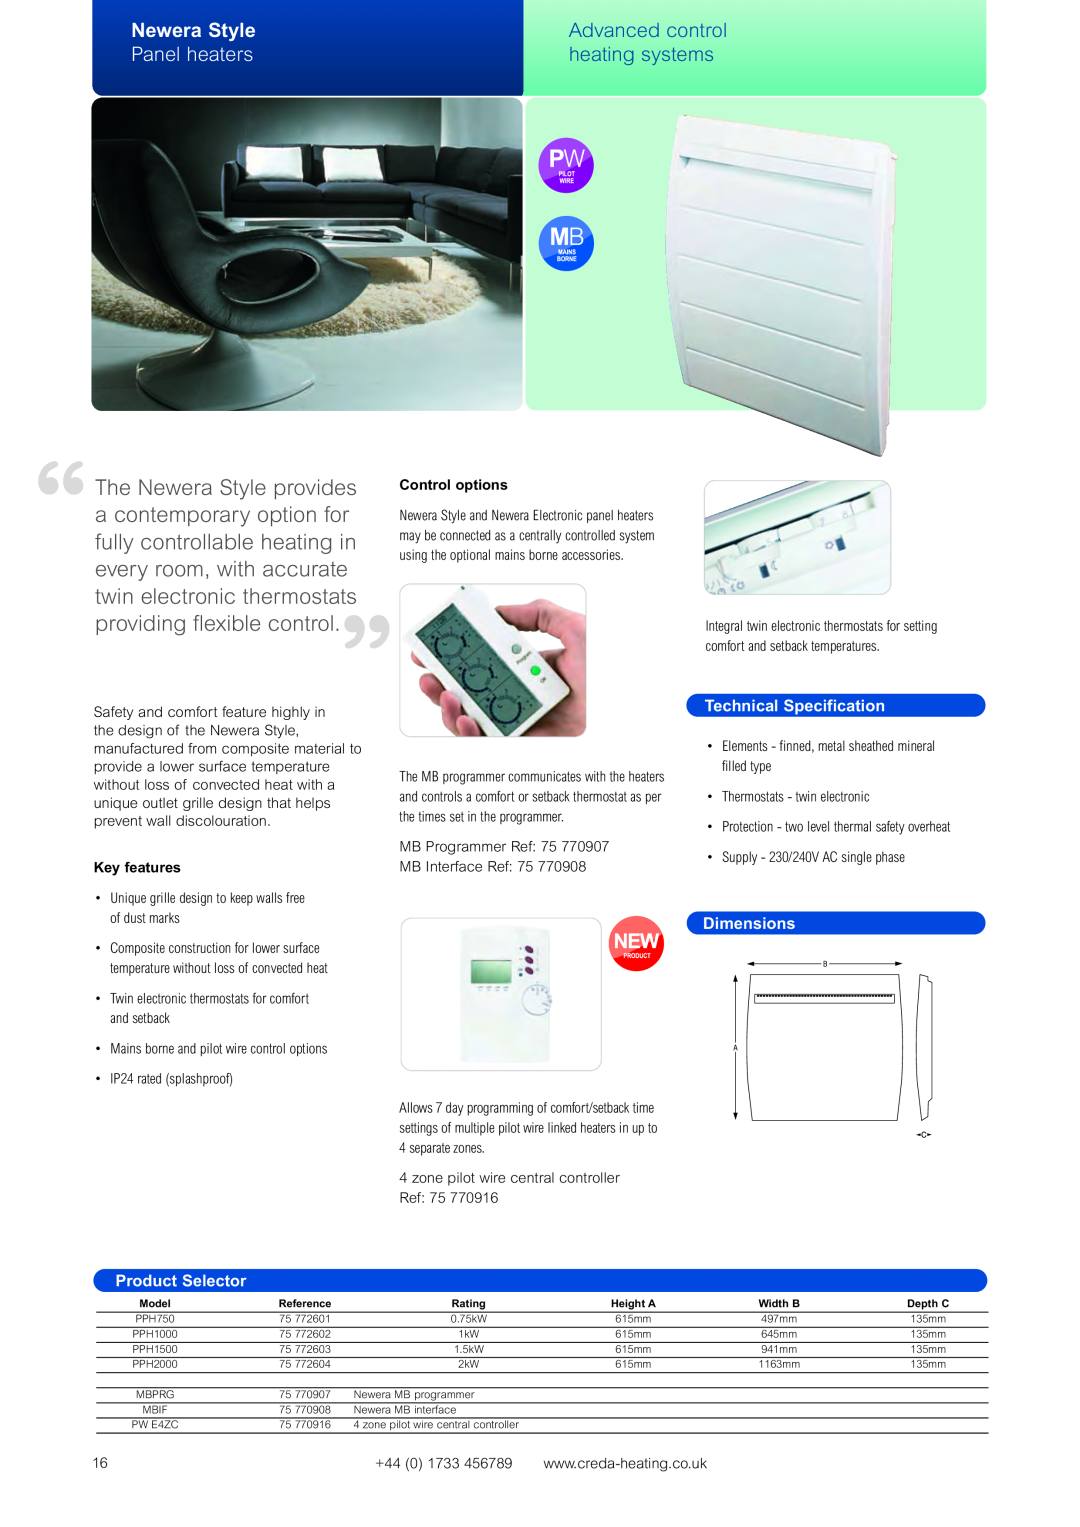 Creda Advanced Control Heating Systems manual Newera Style, Panel heaters, Advanced control, heating systems, Dimensions 